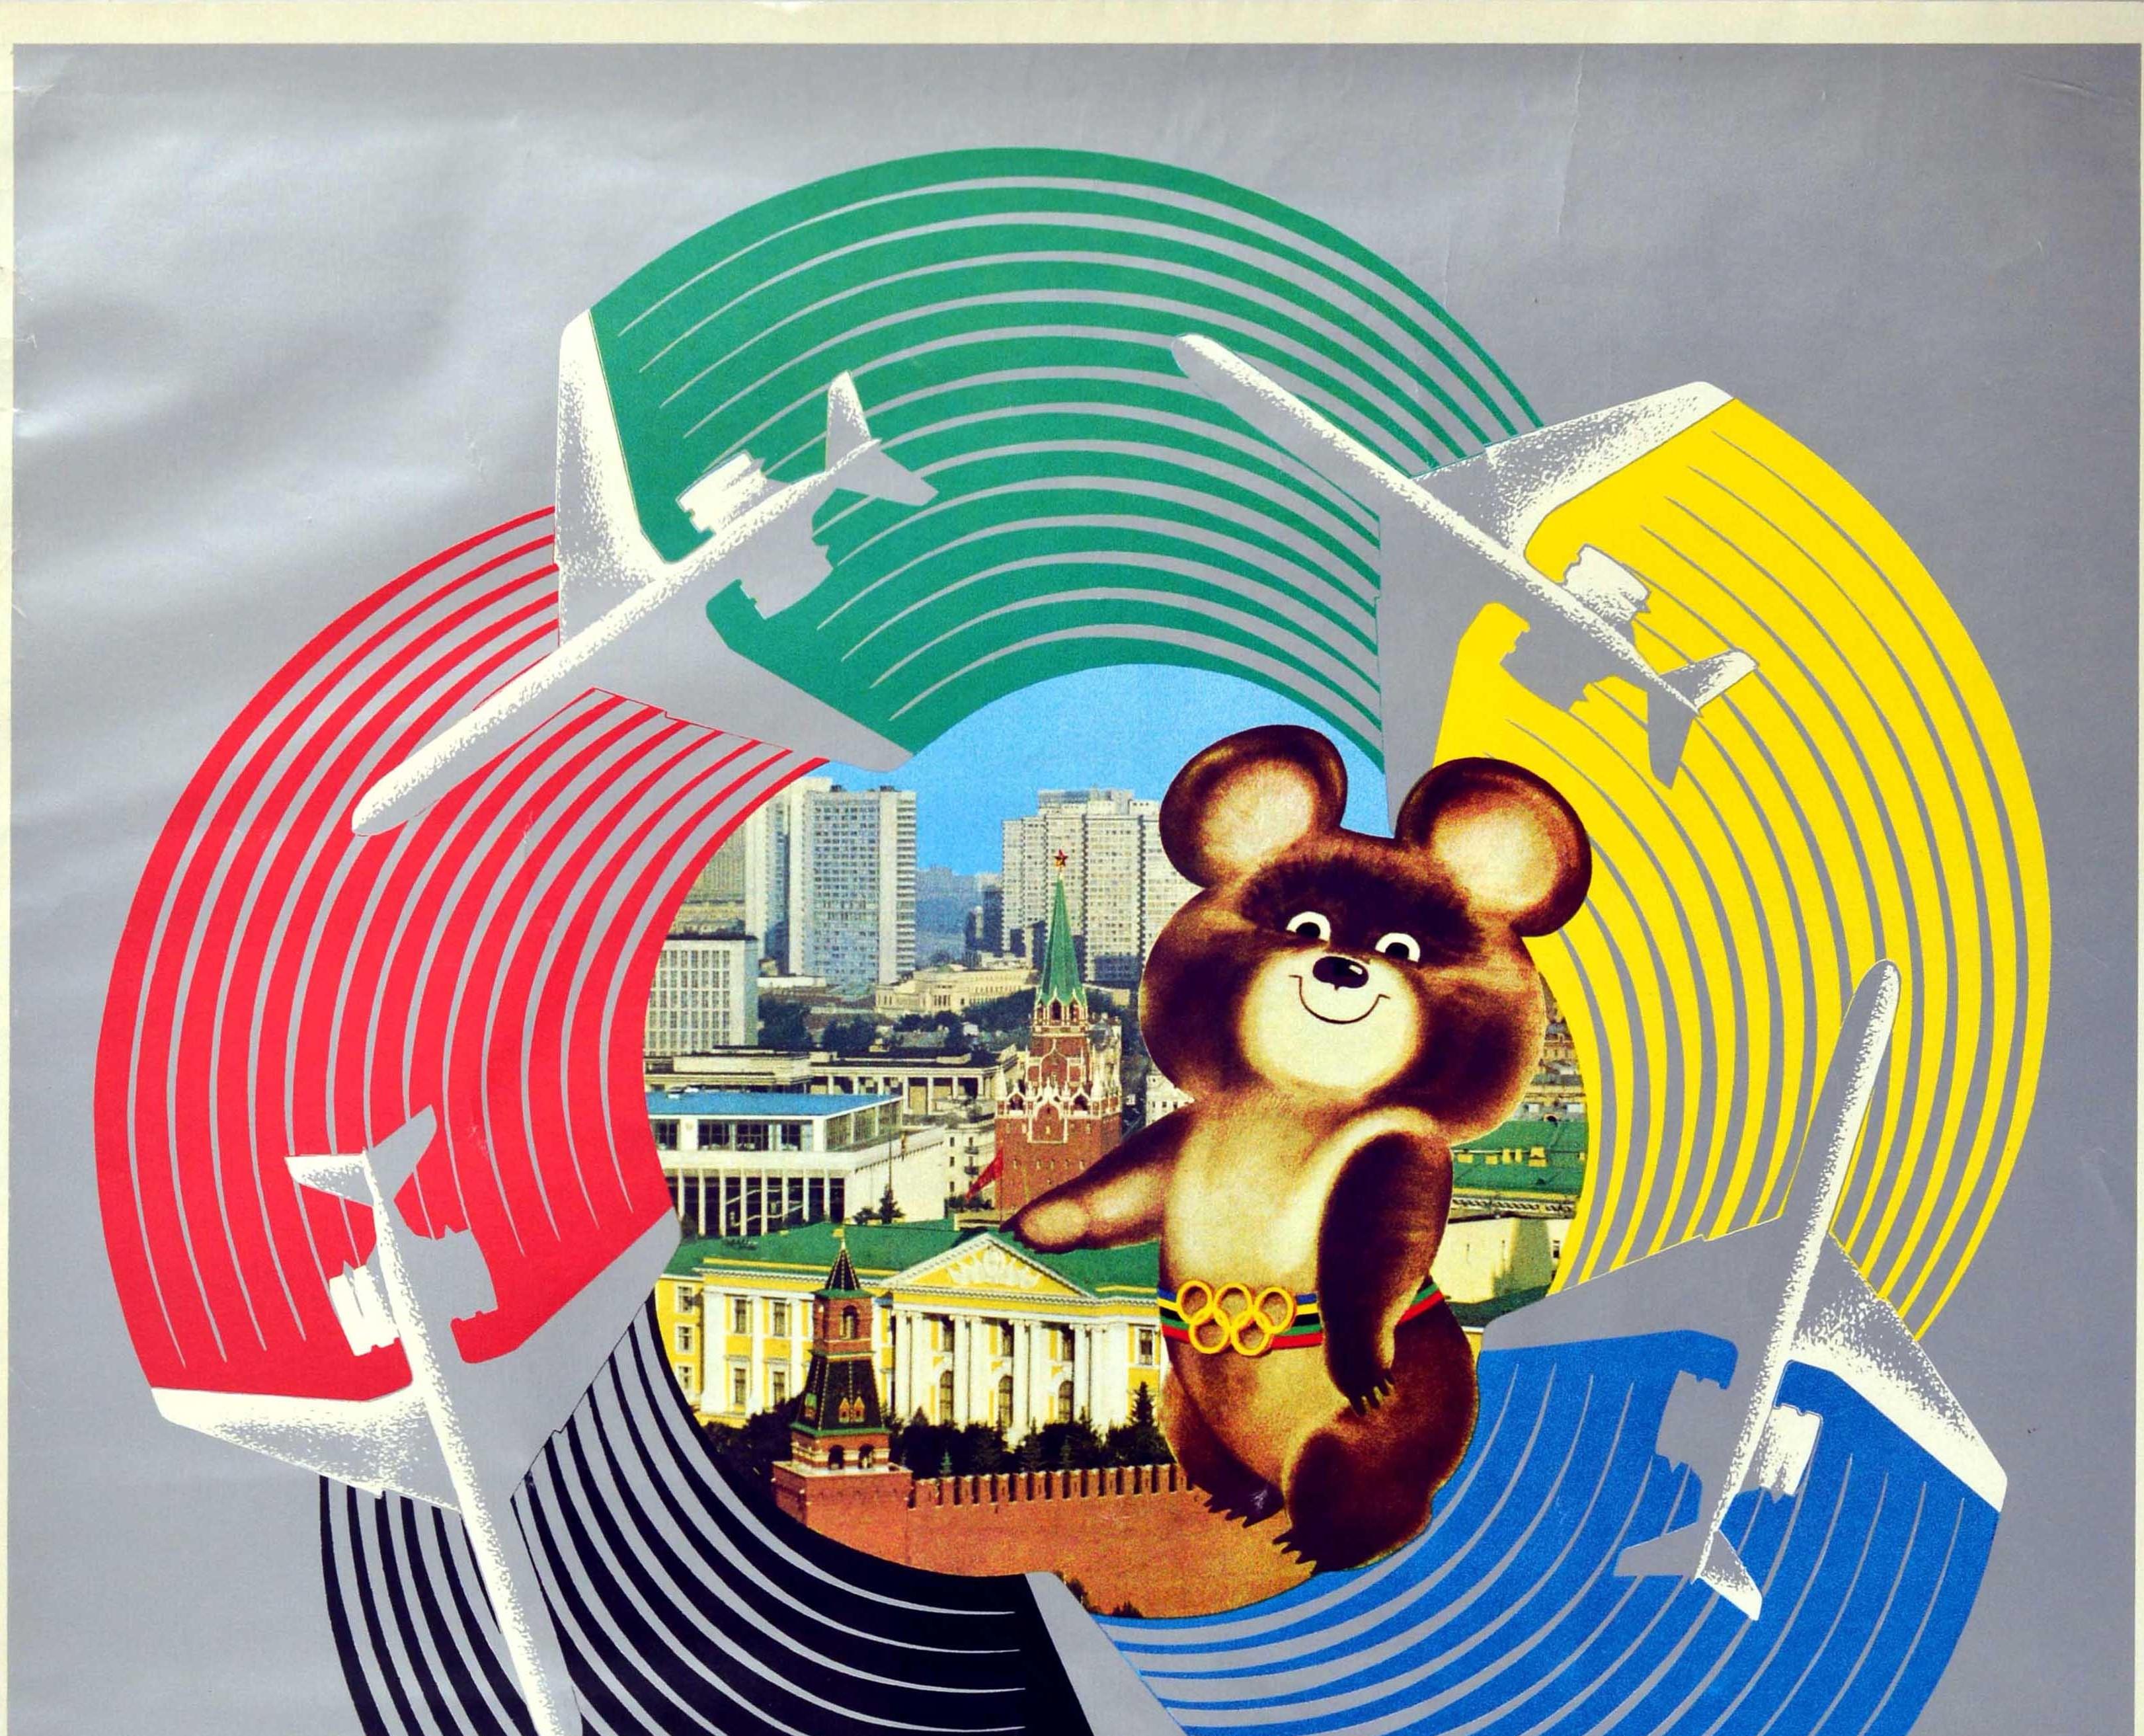 Original vintage sport travel poster for the Official Olympic Carrier Aeroflot Soviet Airlines featuring a fun and colourful illustration depicting the smiling bear Misha the Moscow Olympic Games mascot (designed by the children's book illustrator